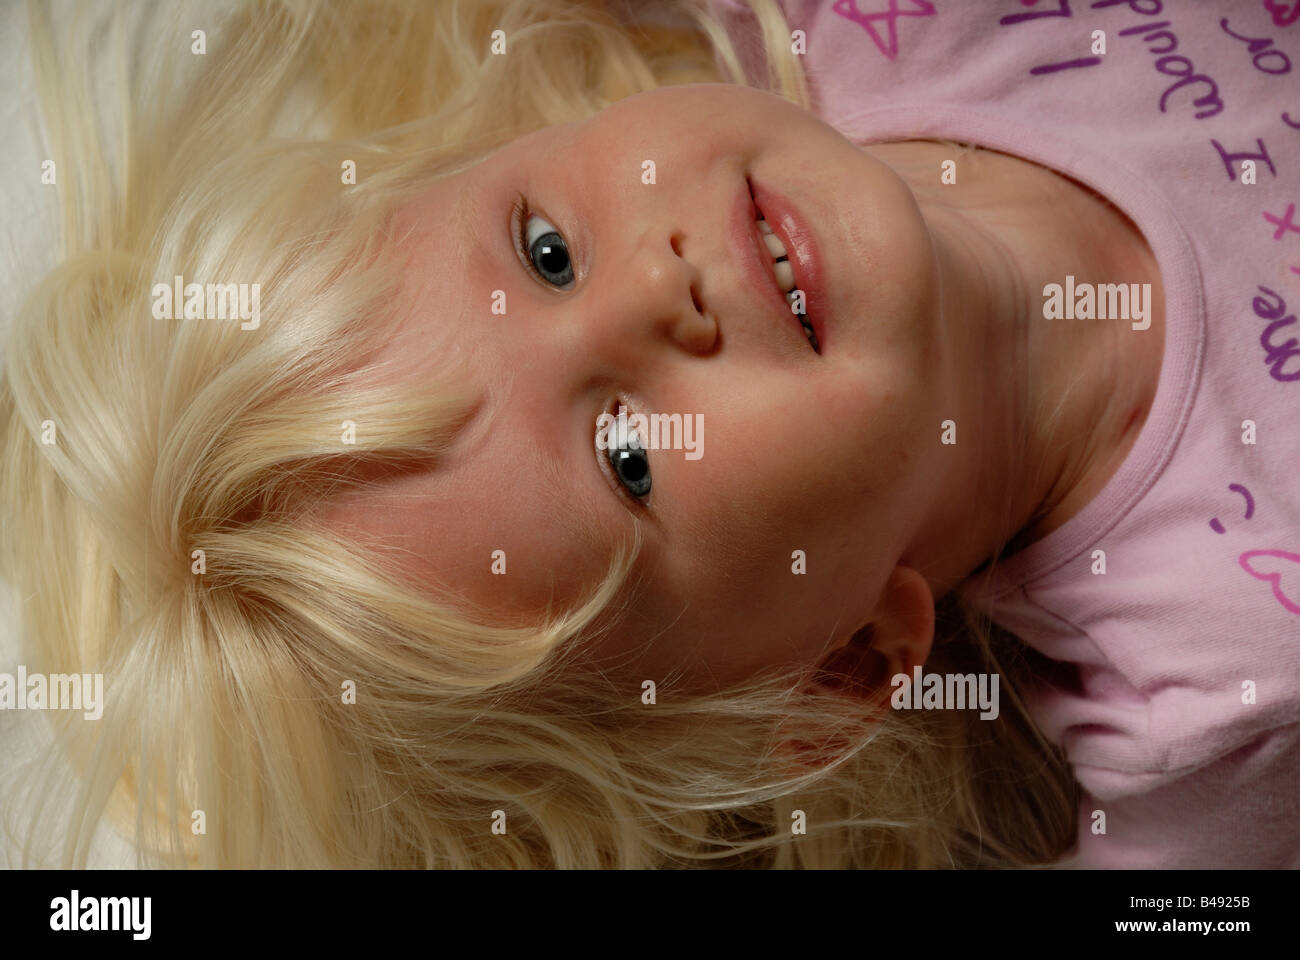 Stock photo of a portrait of a blond haried blue eyed three year old child Stock Photo